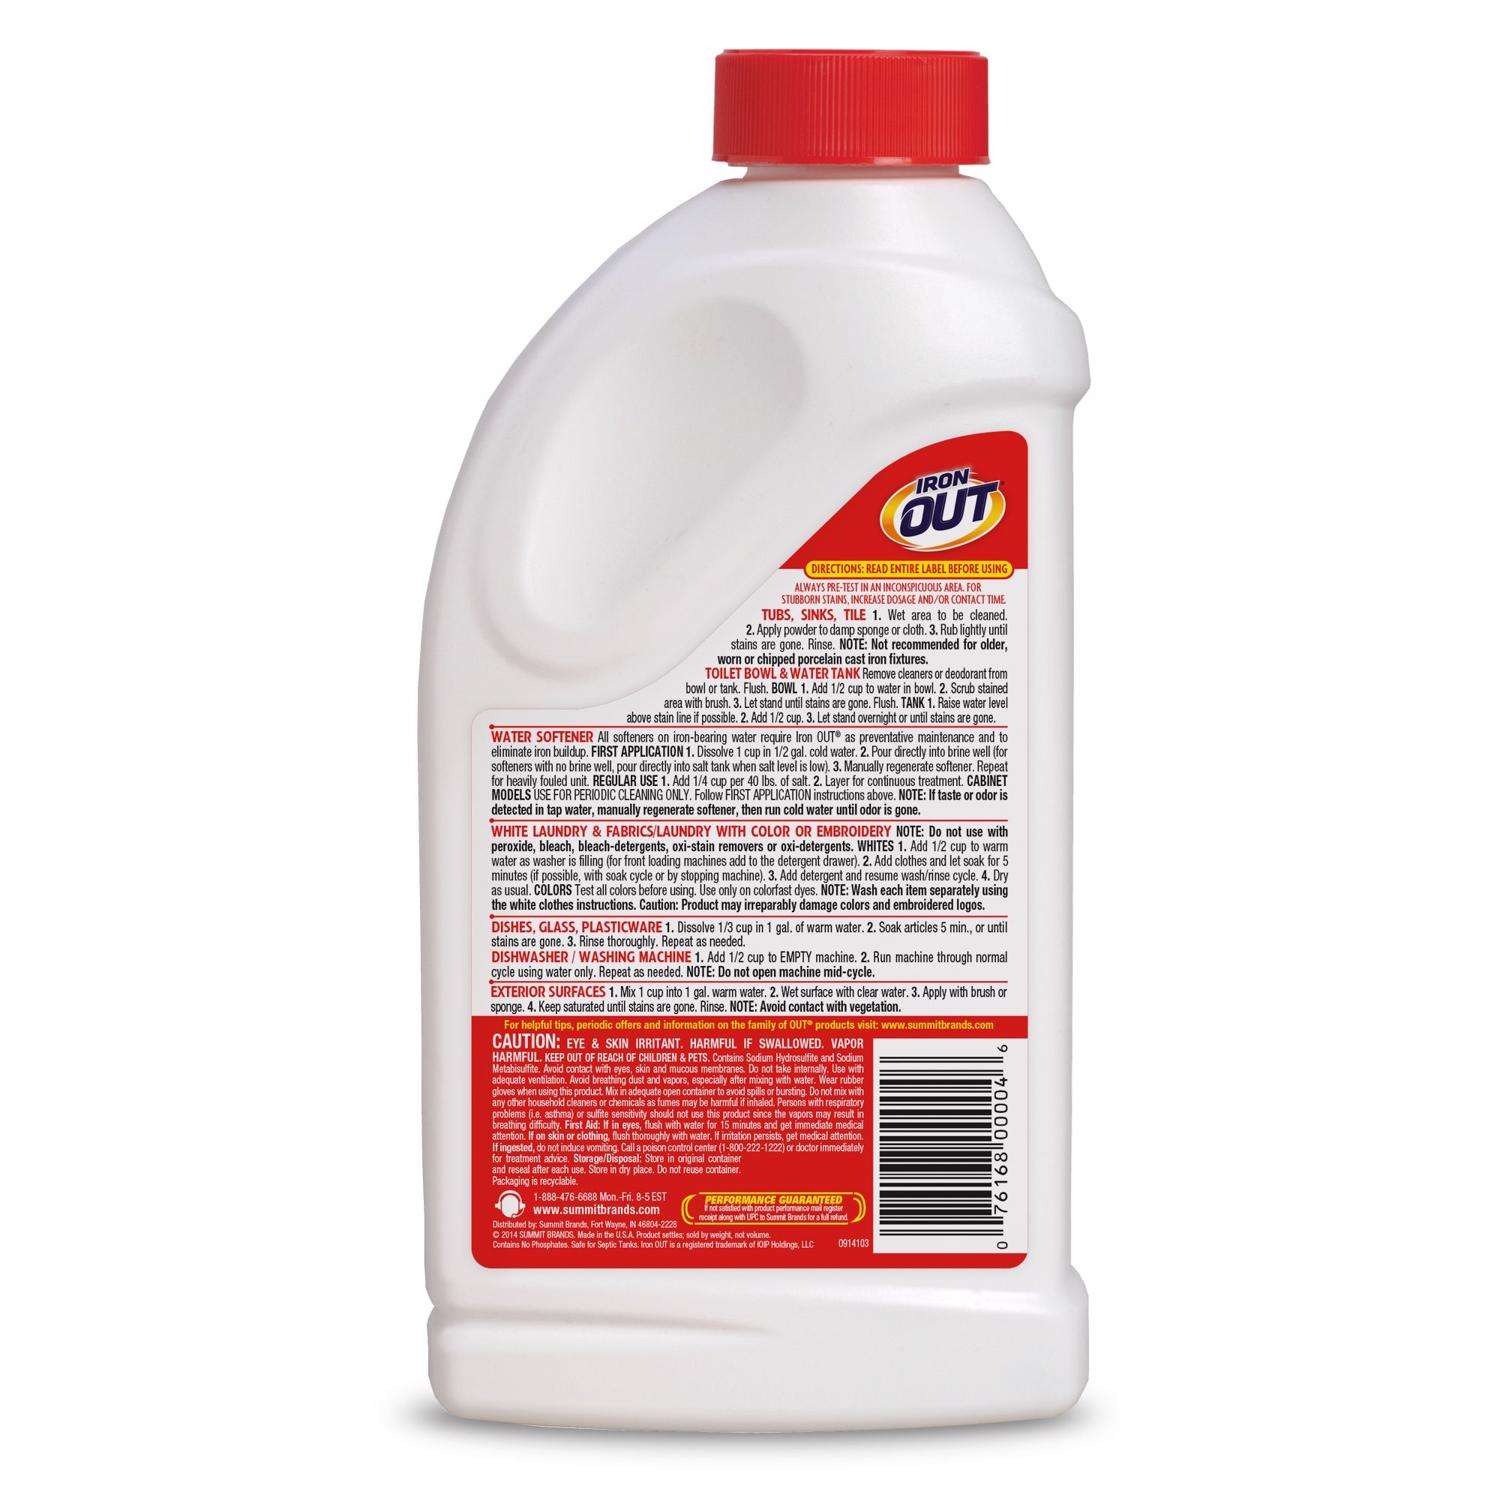 IRON-OUT RUST REMOVER 28 OZ - CHEMICALS - Water Filtration - American Granby